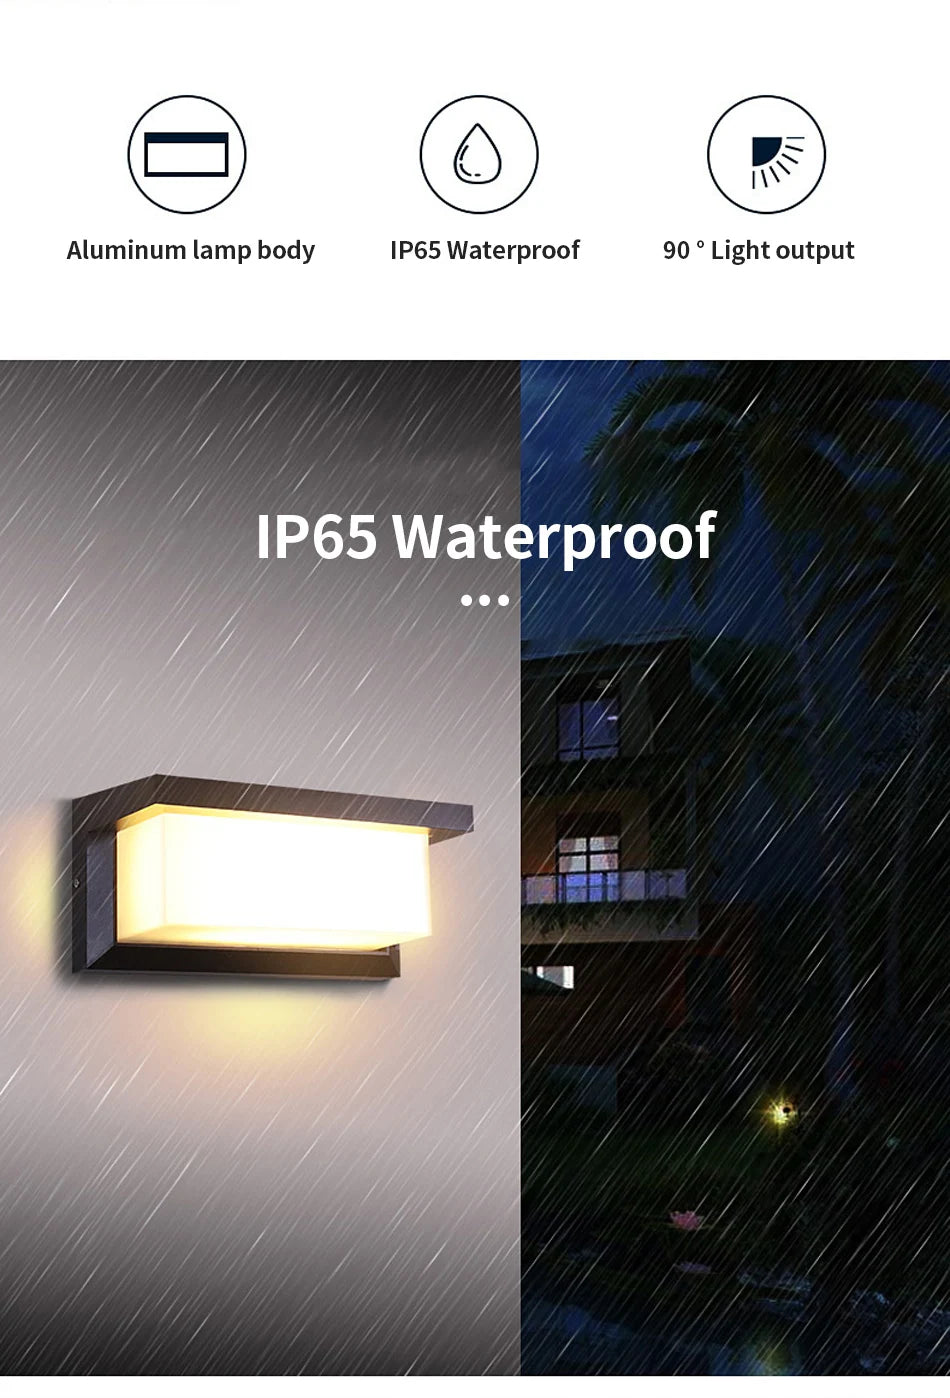 Led Wall Light, Waterproof aluminum lamp with IP65 rating, providing 90-degree light output.